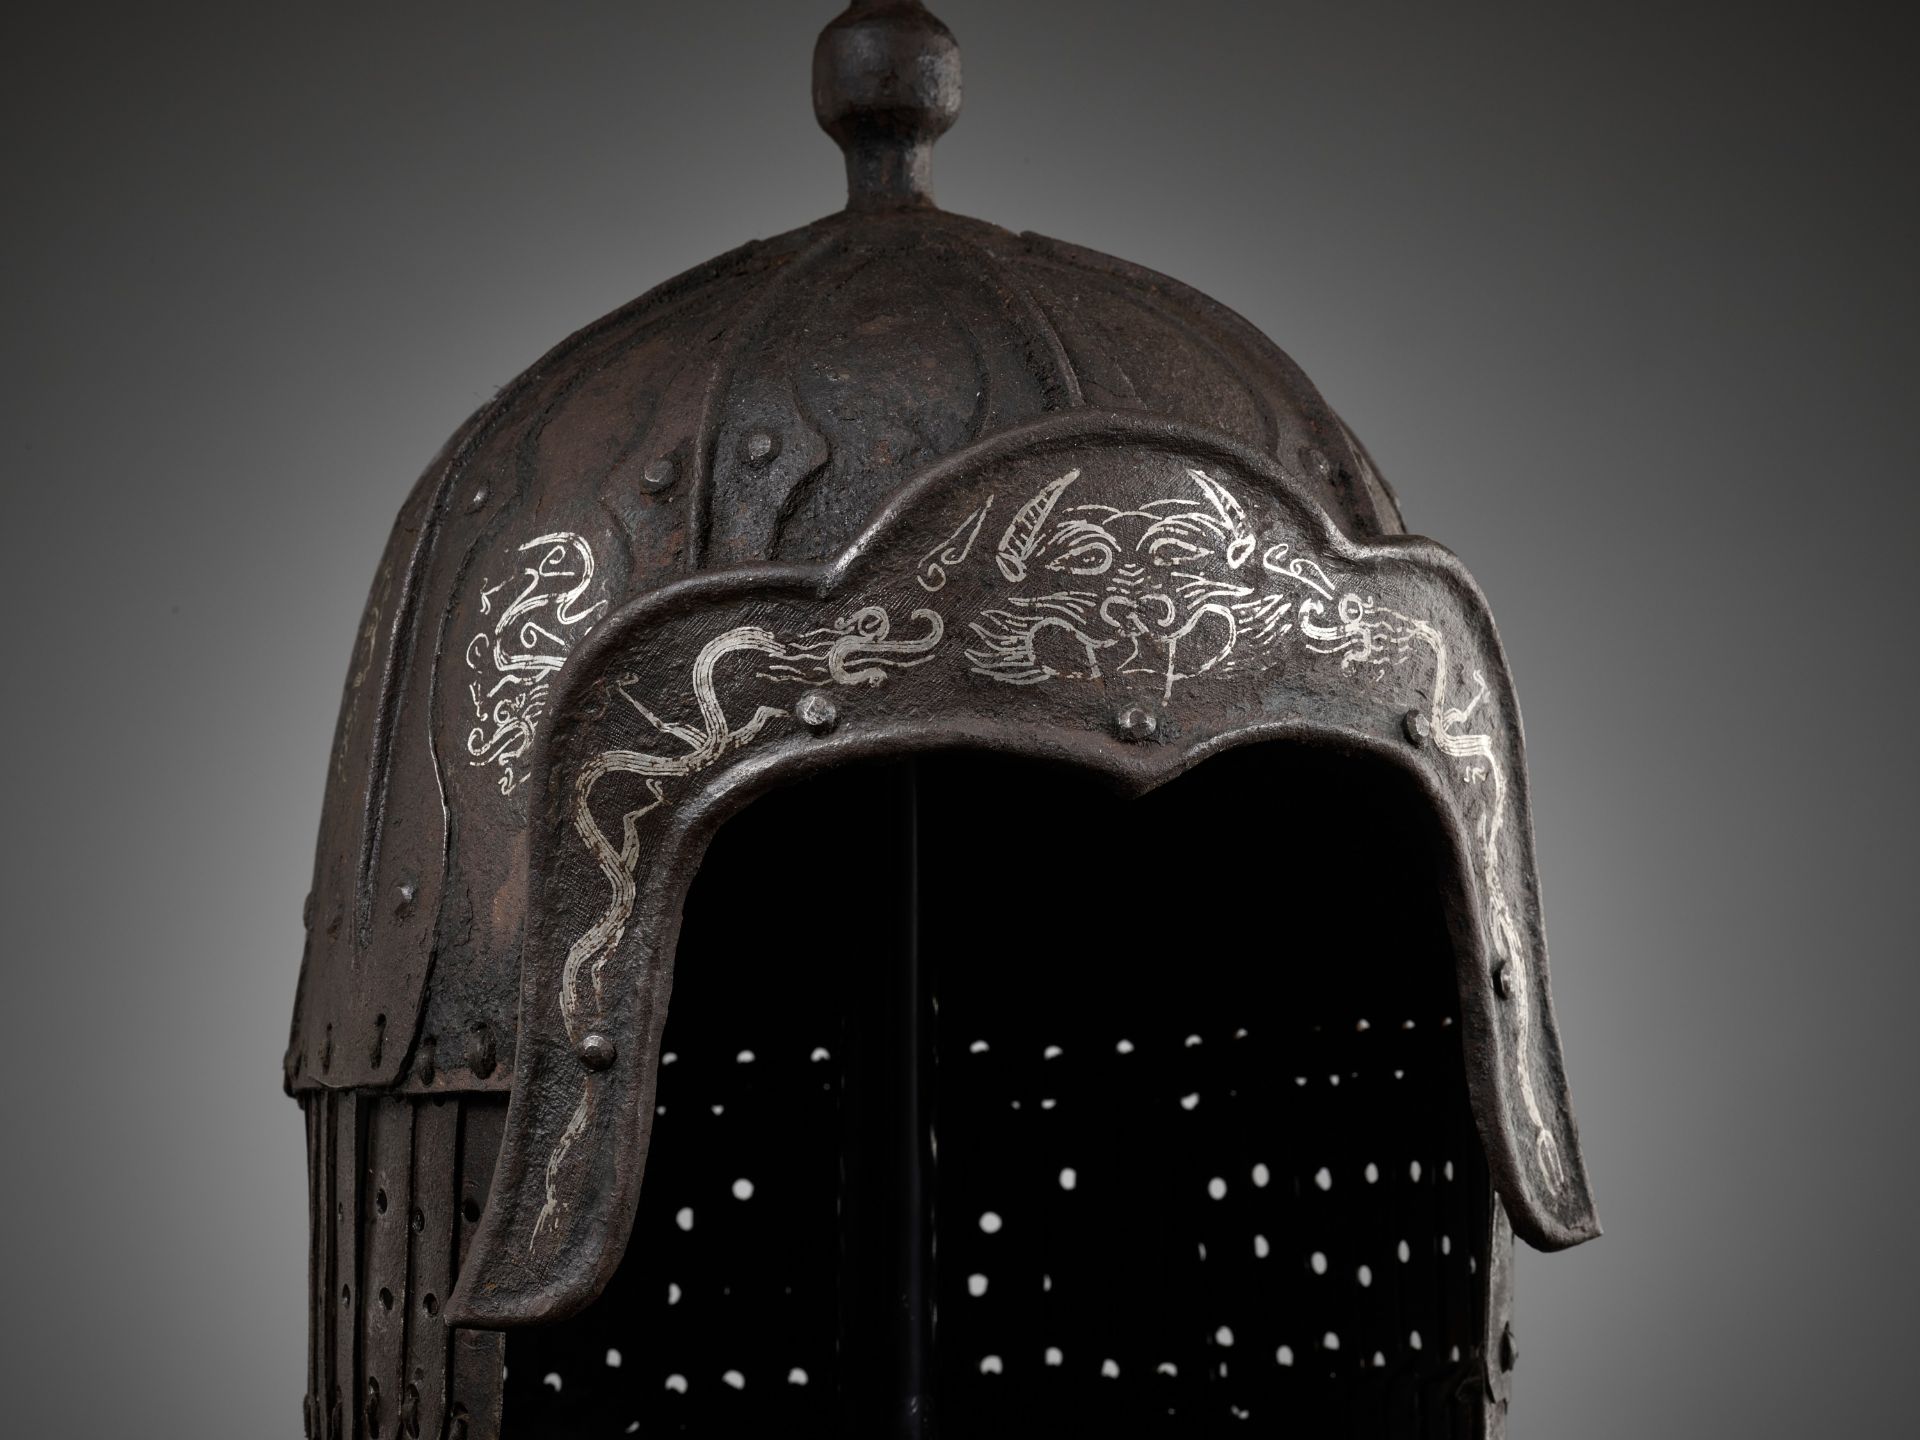 A SILVER-DAMASCENED 'DRAGON' IRON HELMET, 14TH-17TH CENTURY - Image 3 of 9